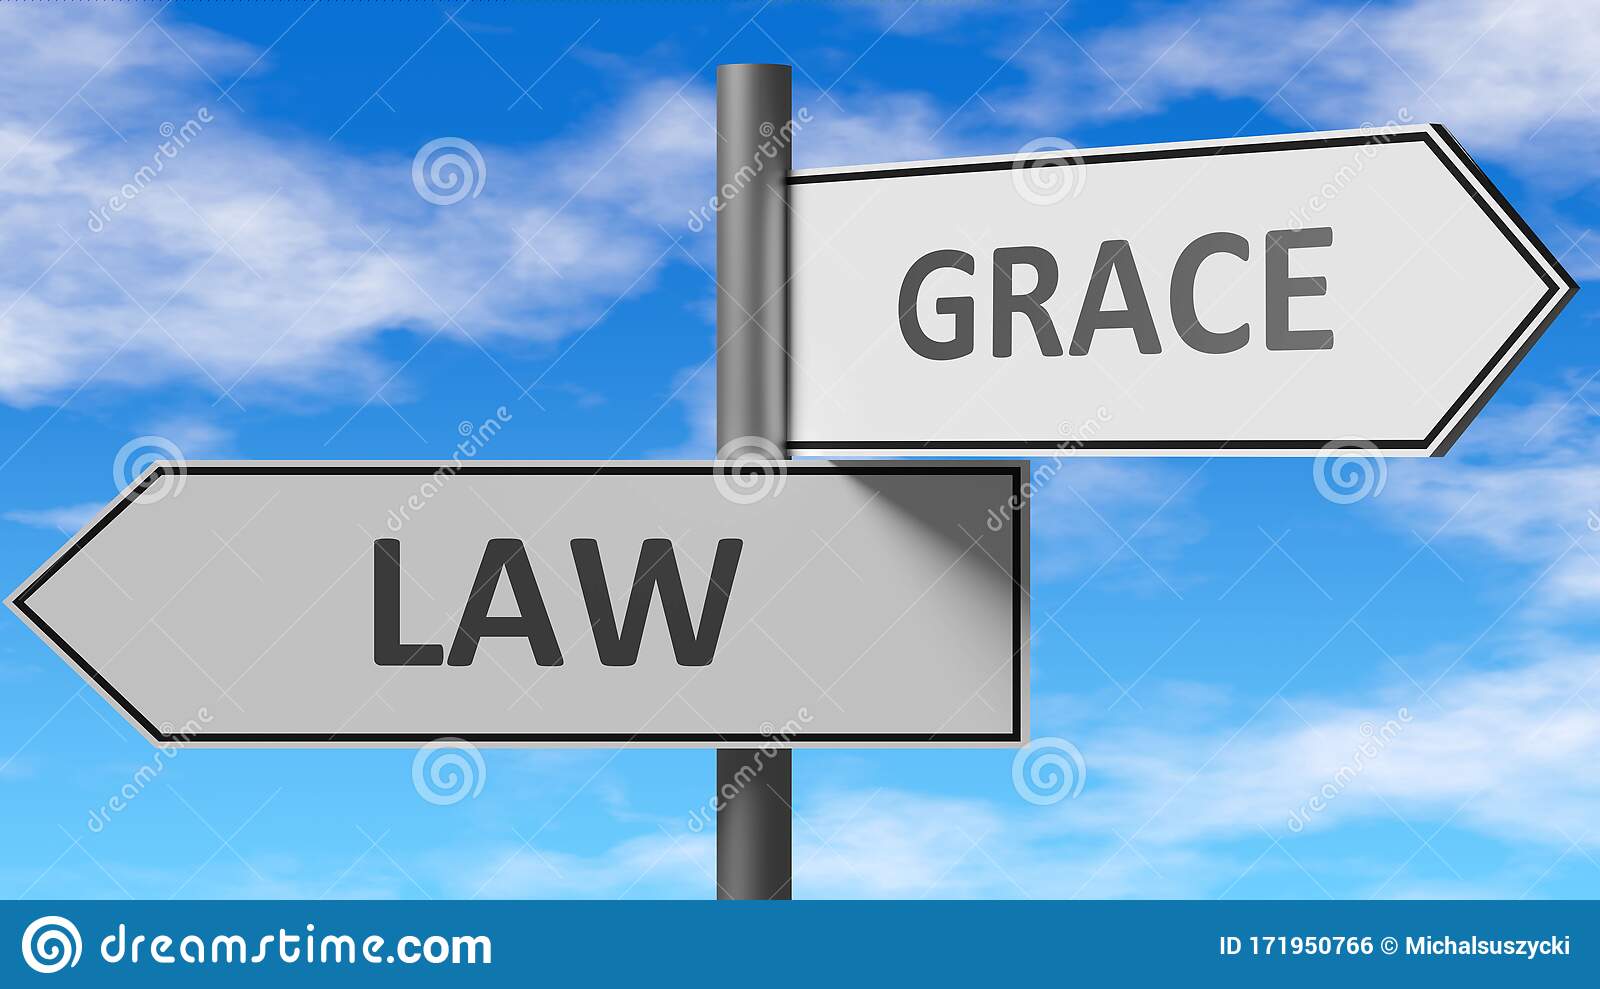 You Cannot Mix Law and Grace